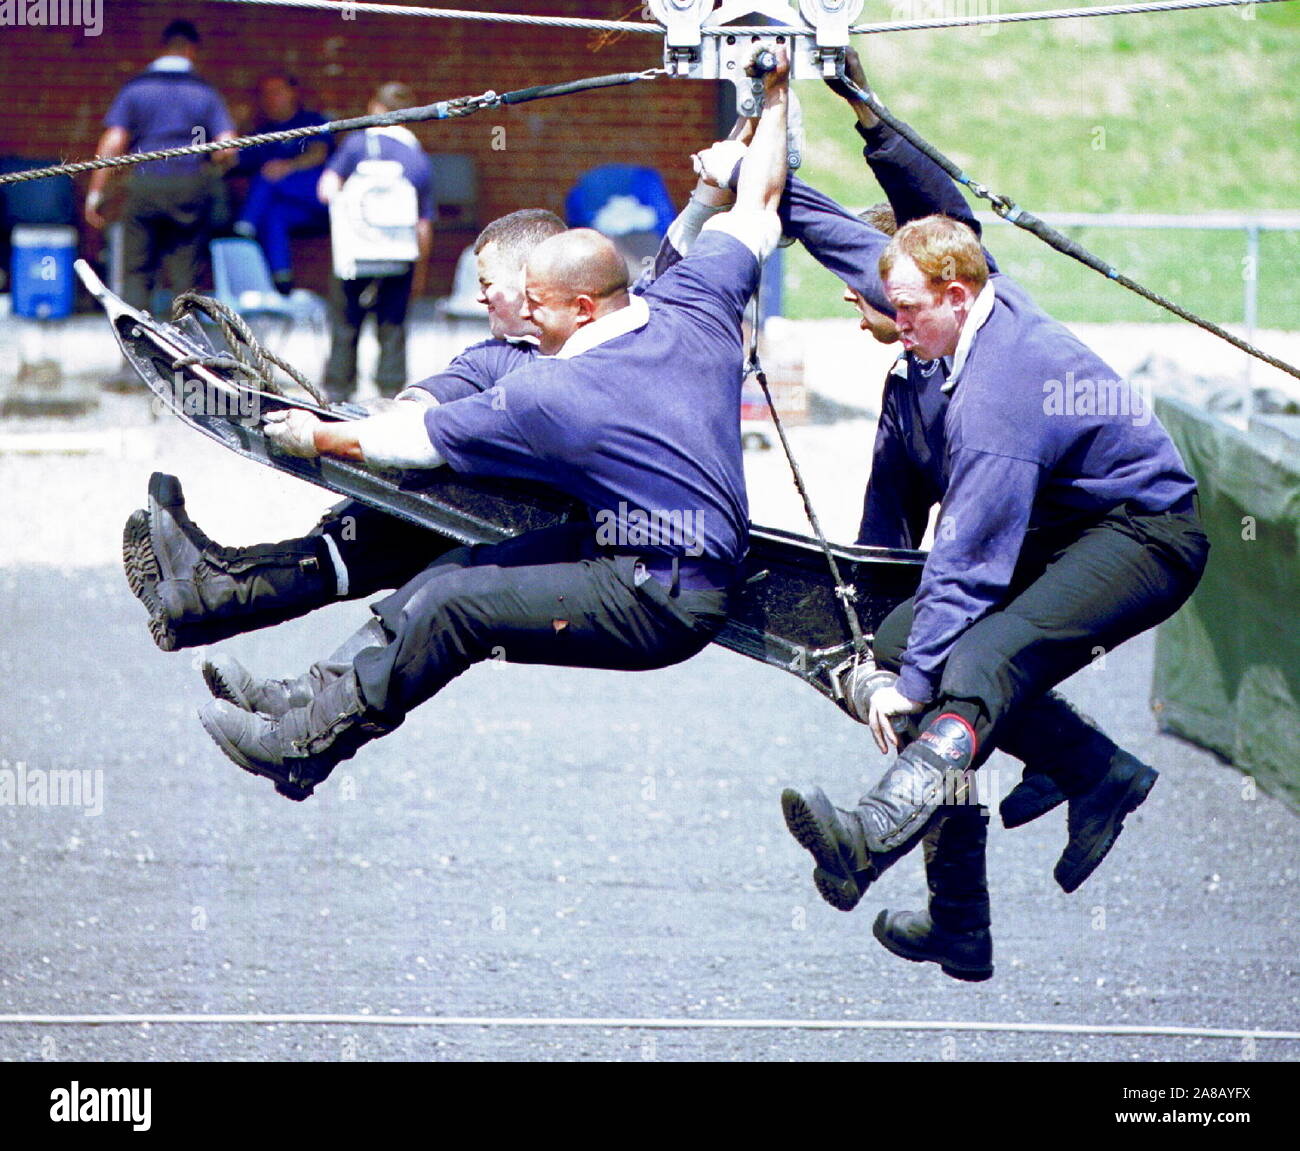 AJAXNETPHOTO. MAY, 1999. PORTSMOUTH, ENGLAND. - FIELD GUN TRAINING - ALL ABOARD! - PORTSMOUTH A-TEAM IN PRACTICE TRAINING FOR THE EARLS COURT, LONDON, ROYAL TOURNAMENT COMPETITION AT THEIR TRAINING GROUND AT WHALE ISLAND. PHOTO: JONATHAN EASTLAND/AJAX REF:3 0599 Stock Photo